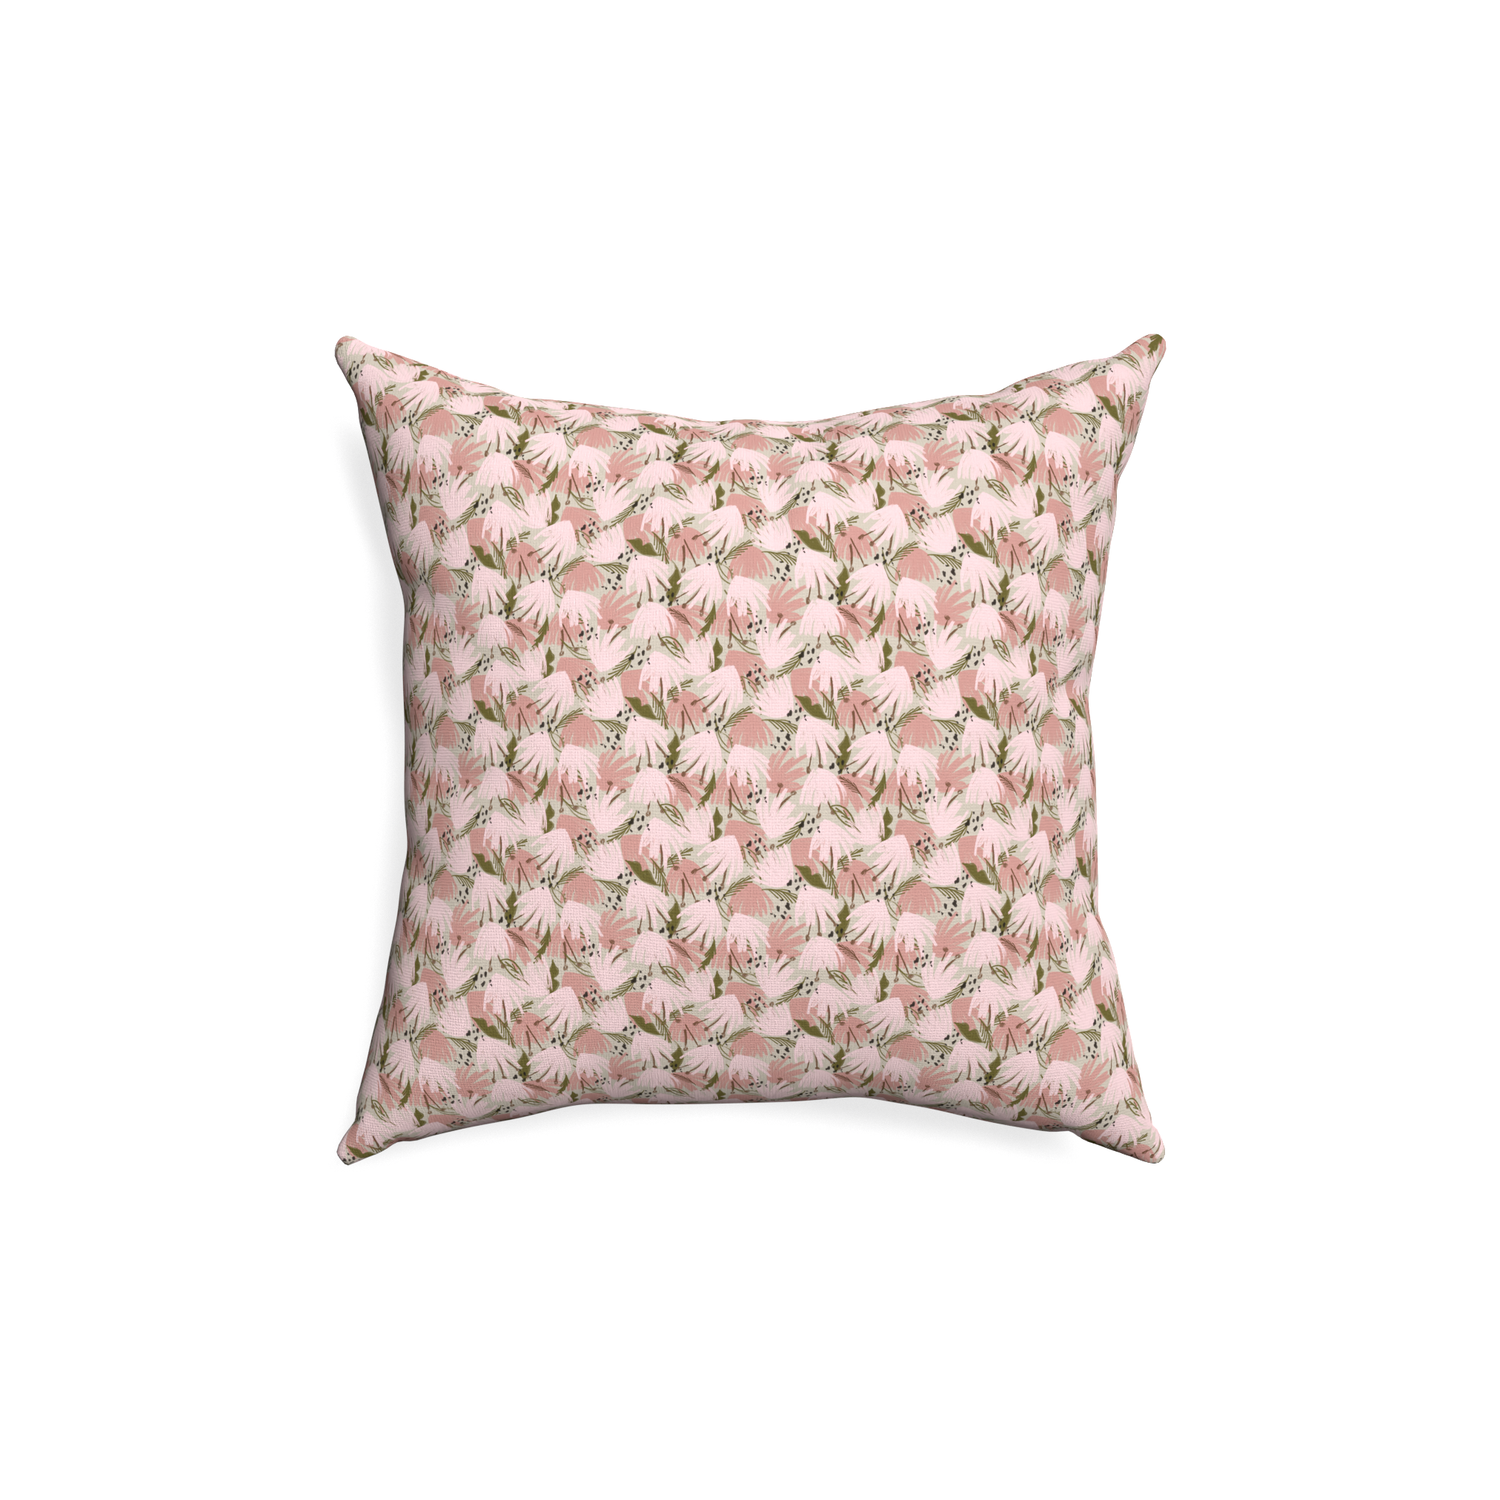 18-square eden pink custom pillow with none on white background